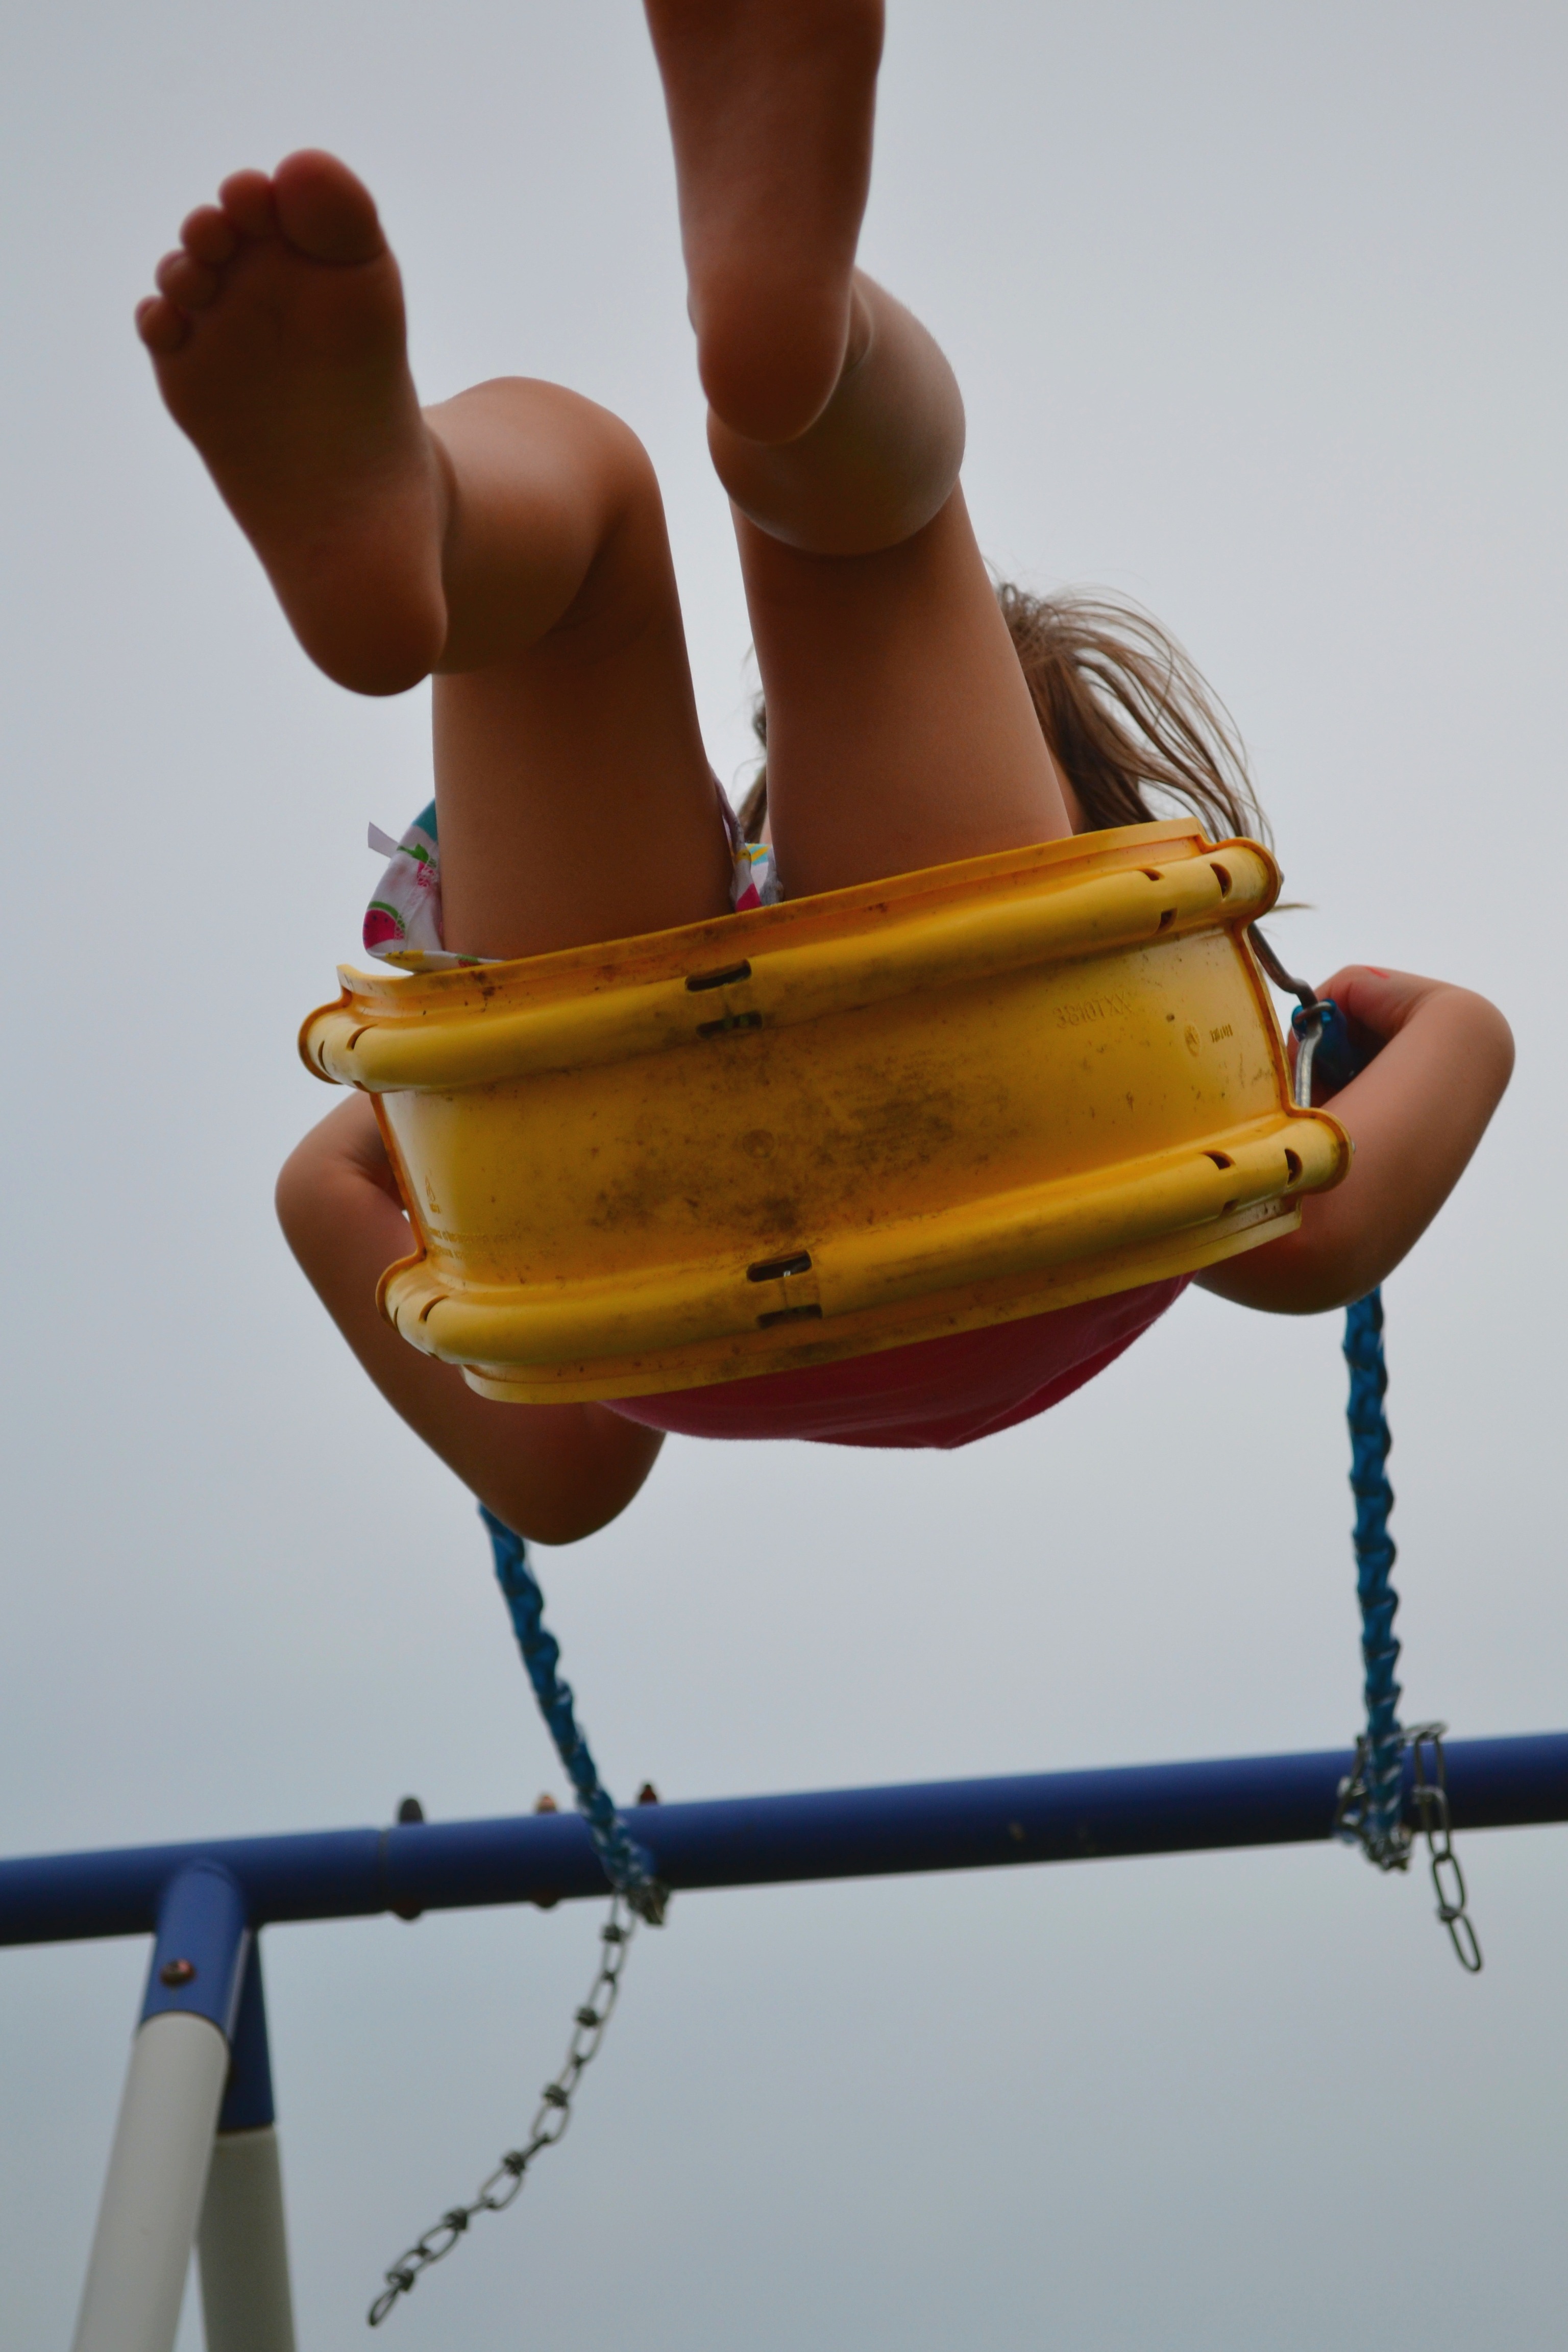 Girl barefoot riding a swing free image